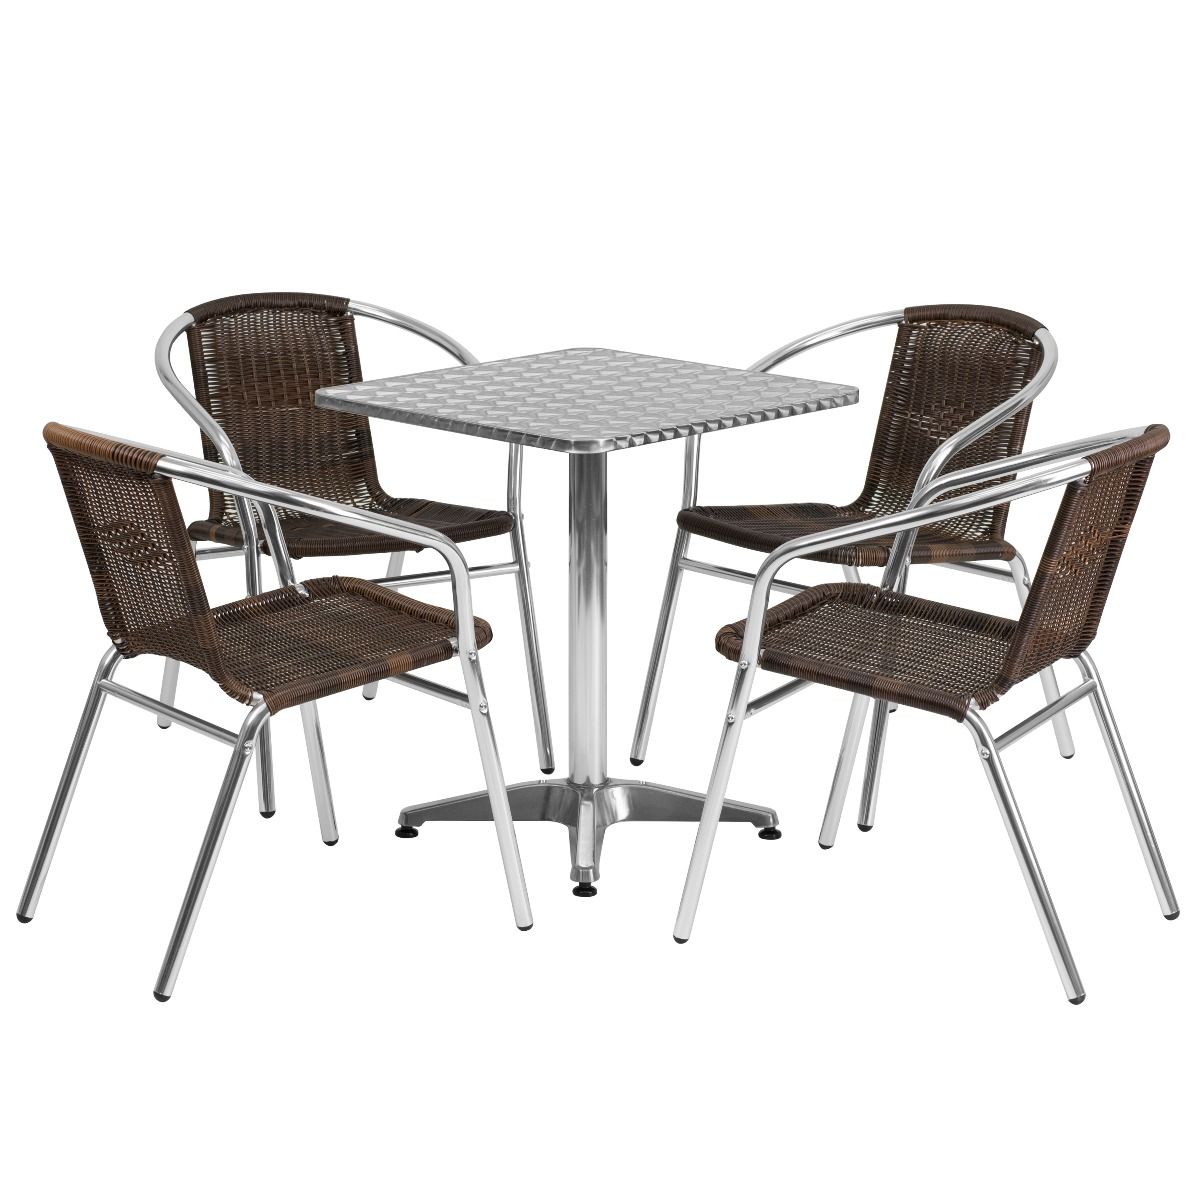 23.5'' Square Aluminum Indoor-Outdoor Restaurant Table with 4 Slat Back Chairs 